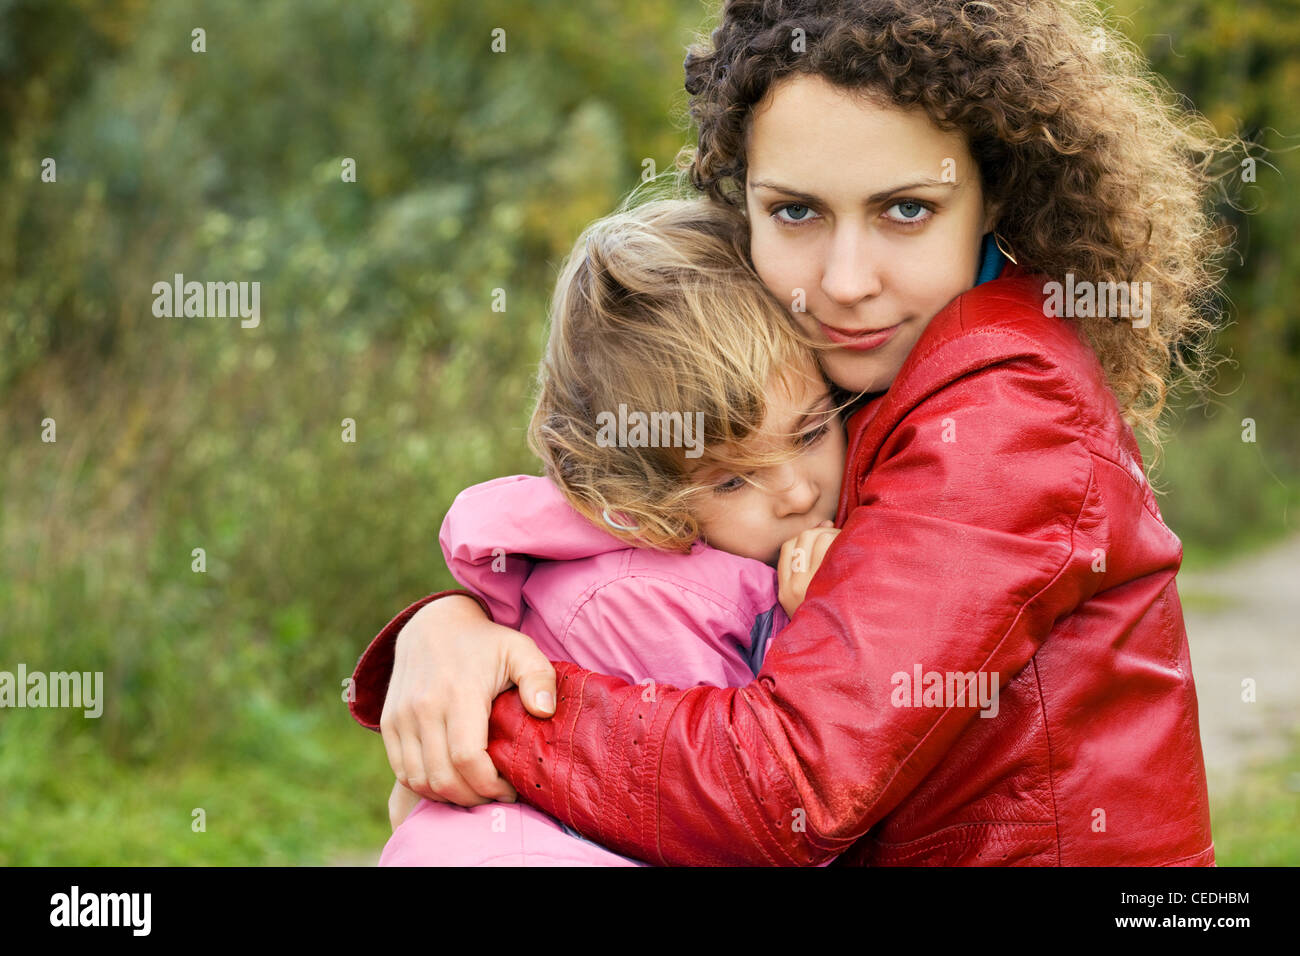 young woman protects little girl from wind in garden Stock Photo